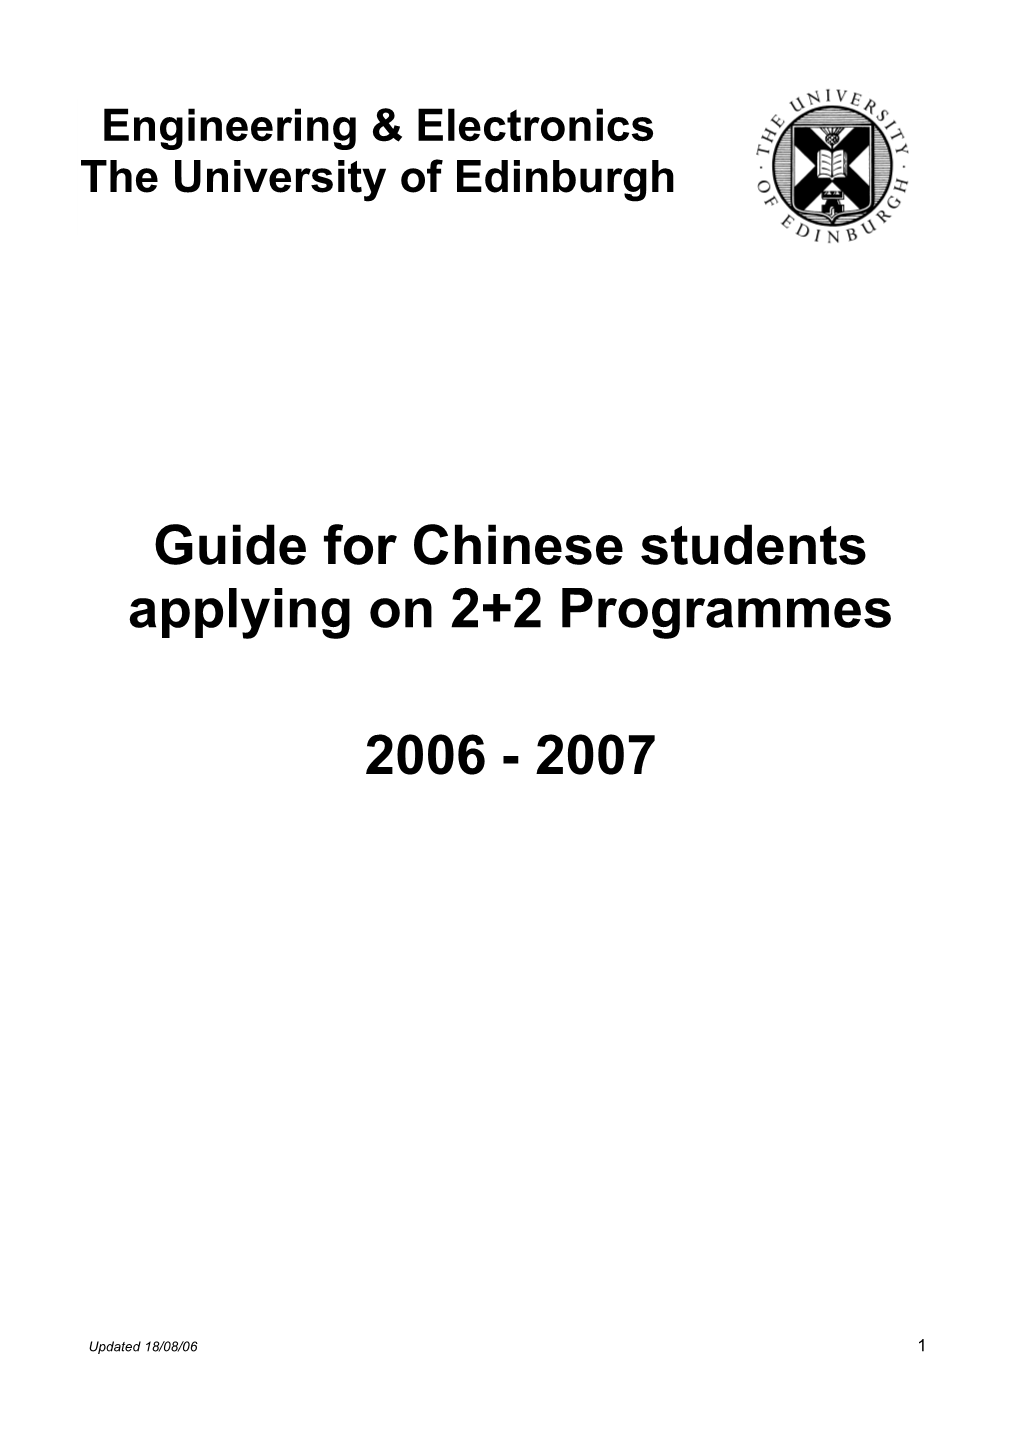 Guide for Chinese Students